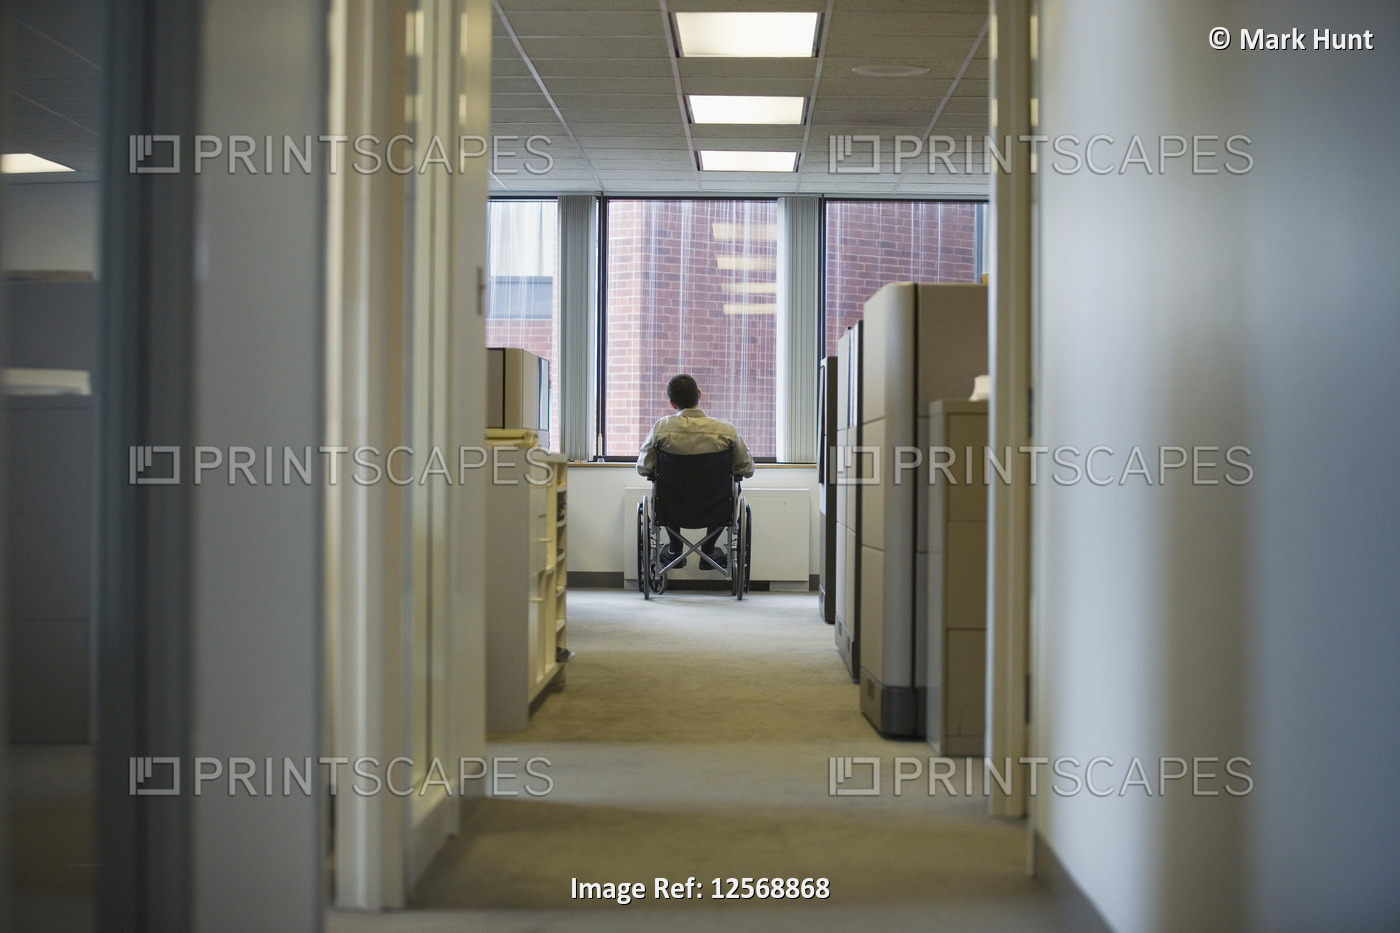 Rear view of a man sitting in a wheelchair in an office